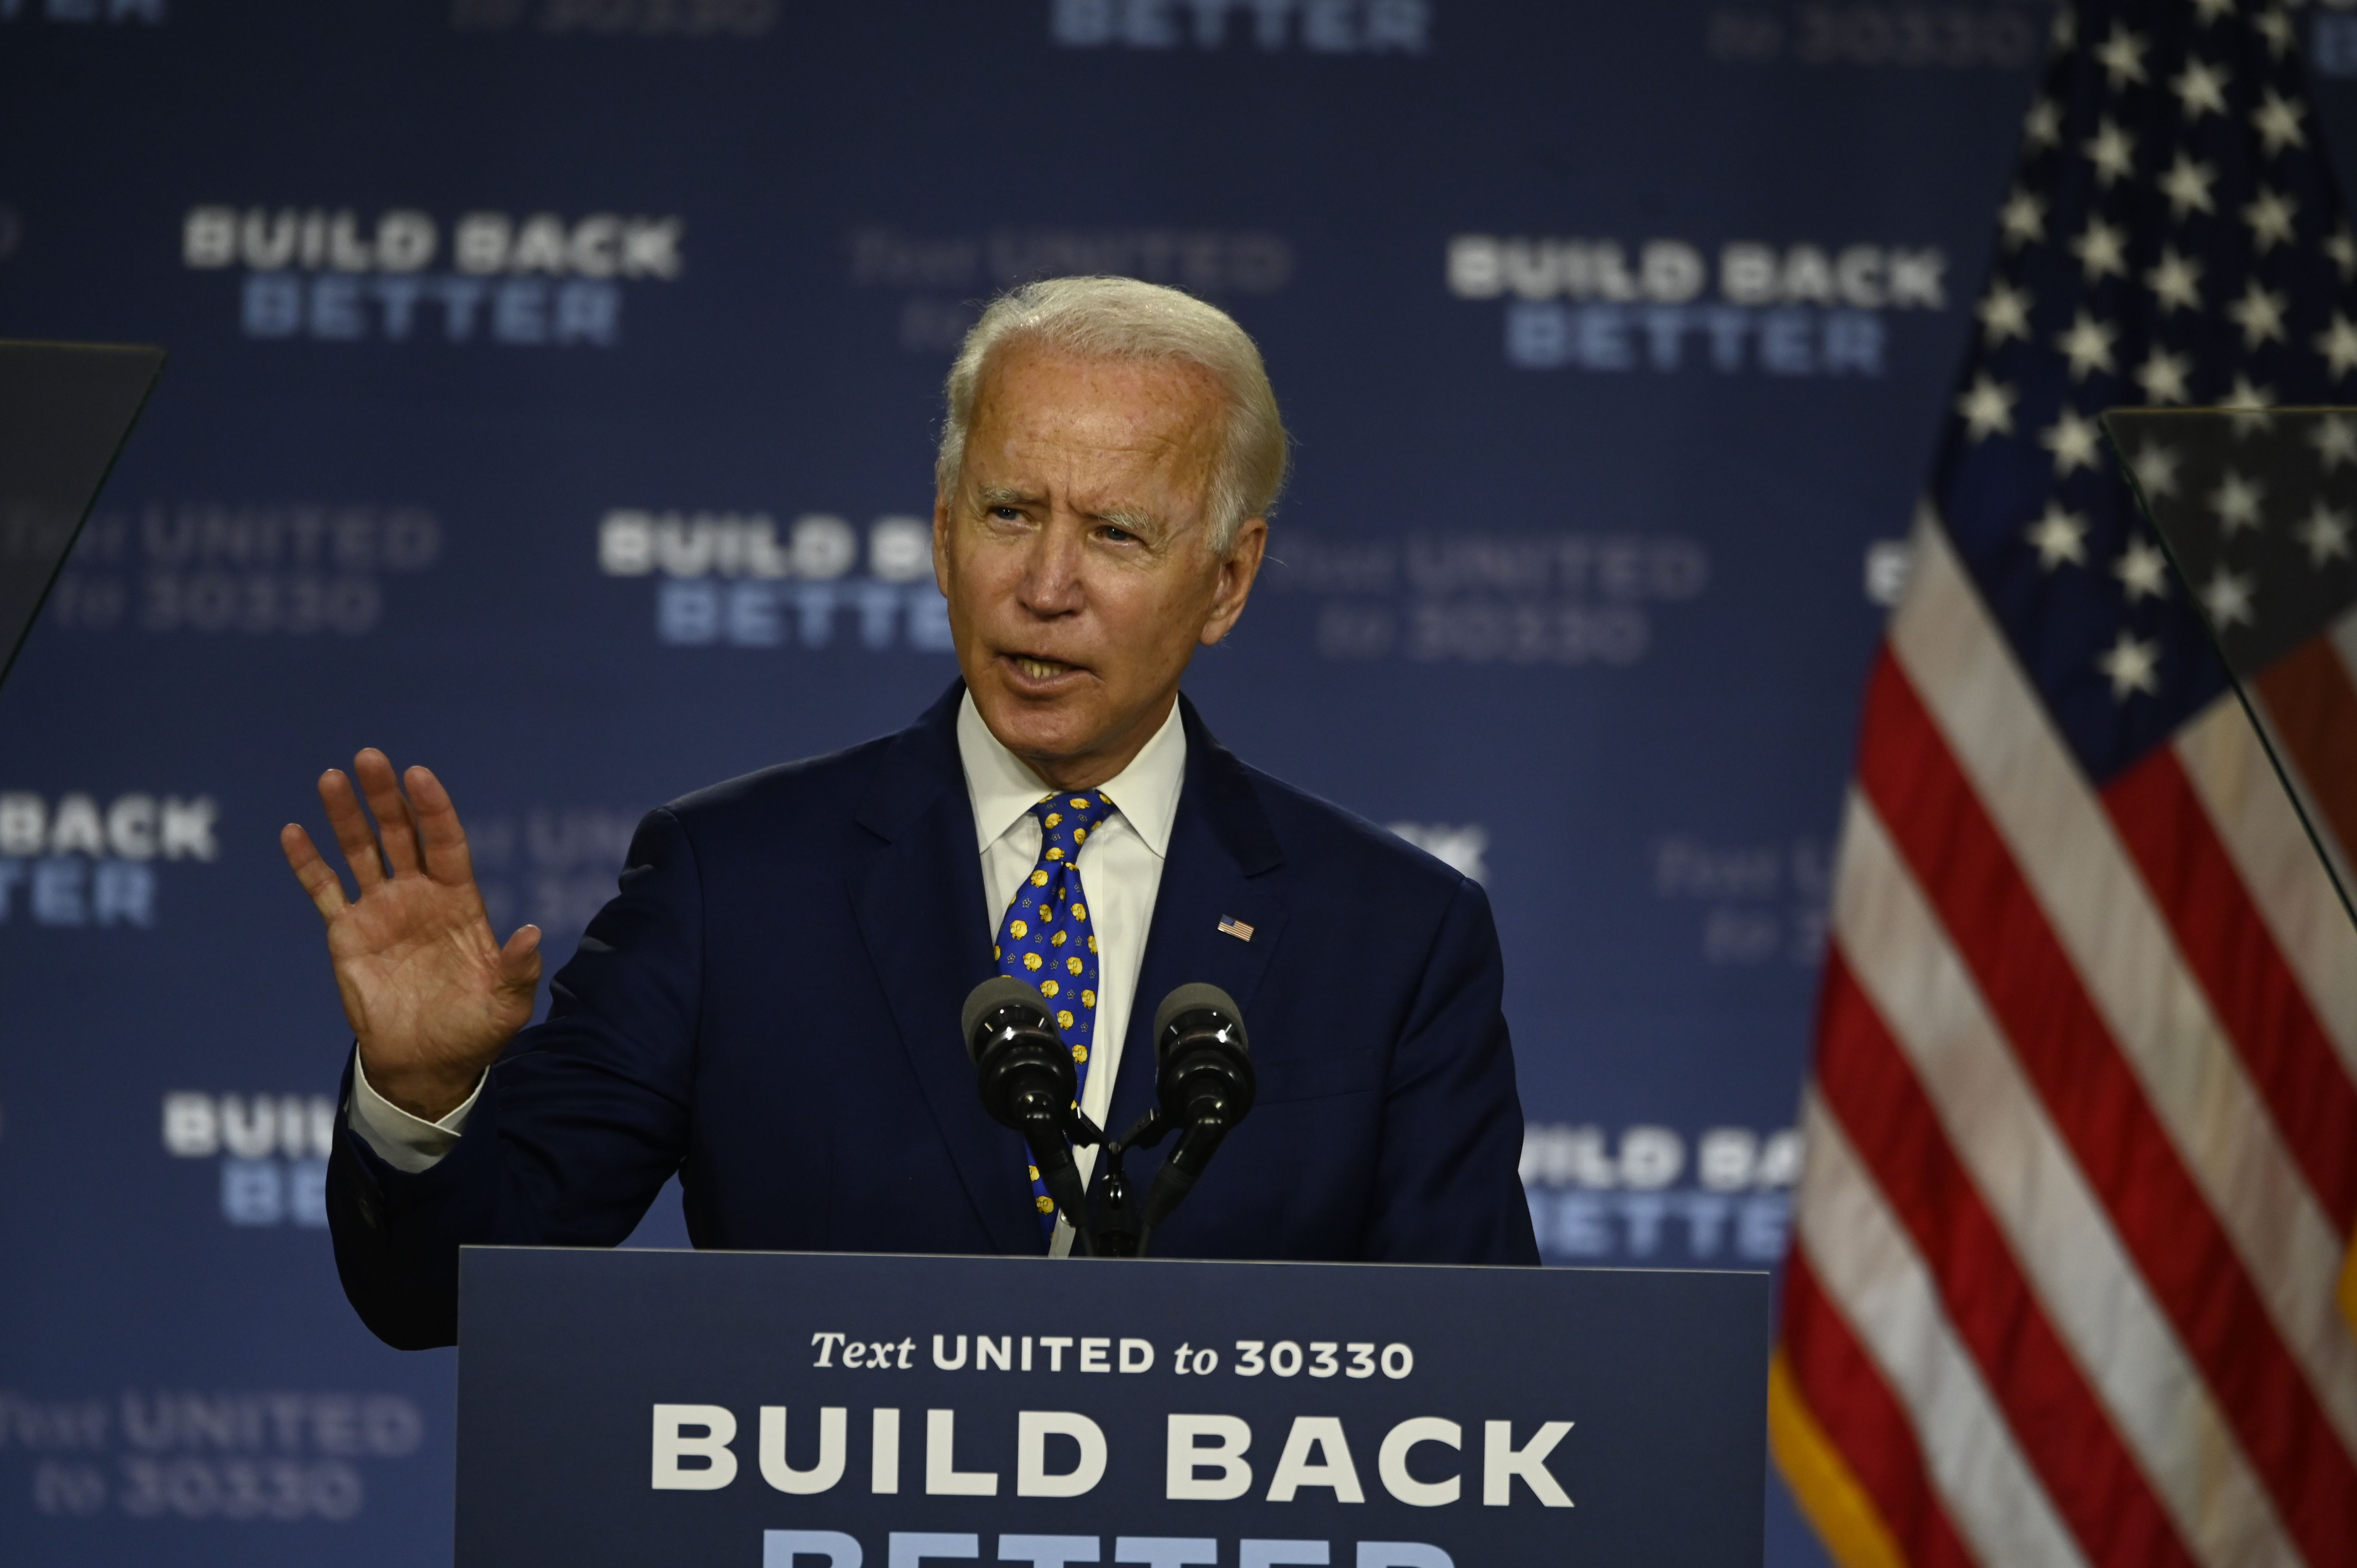 US Democratic presidential candidate and former Vice President Joe Biden speaks during a campaign event at the William "Hicks" Anderson Community Center in Wilmington, Delaware on July 28, 2020. (Photo by ANDREW CABALLERO-REYNOLDS/AFP via Getty Images)